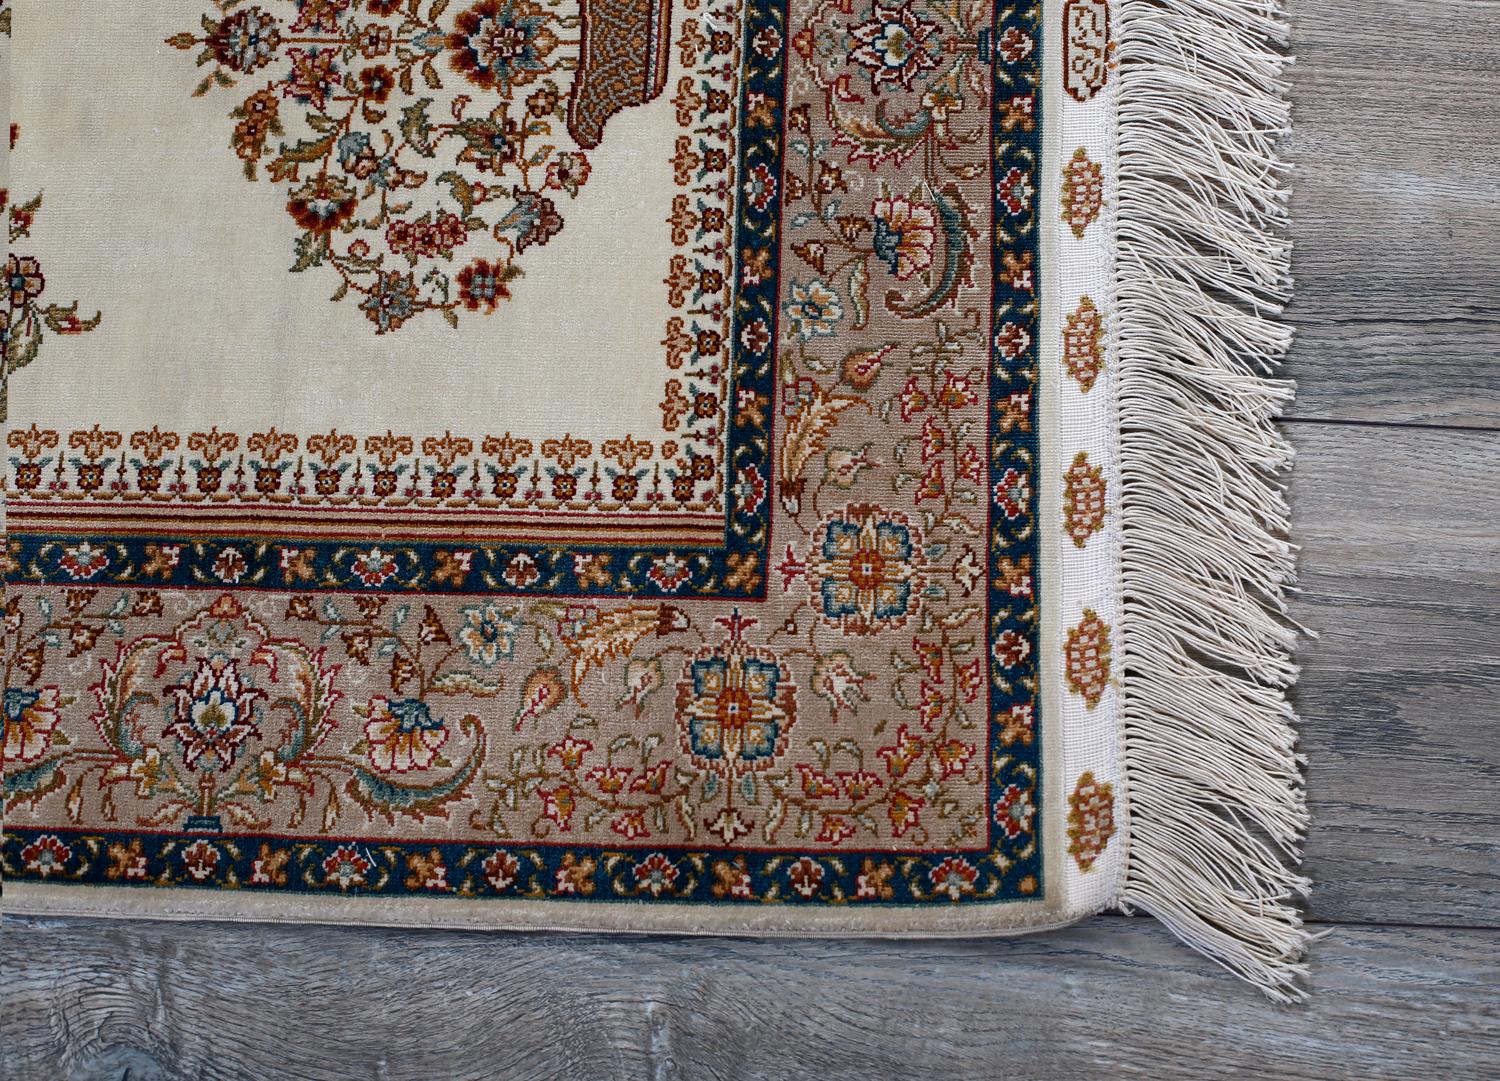 Hereke carpets used to be only produced in Hereke, a coastal town in Turkey, 60 km from Istanbul. The materials used are silk, a combination of wool and cotton and sometimes gold or silver threads.
The Ottoman sultan, Abdülmecid I founded the